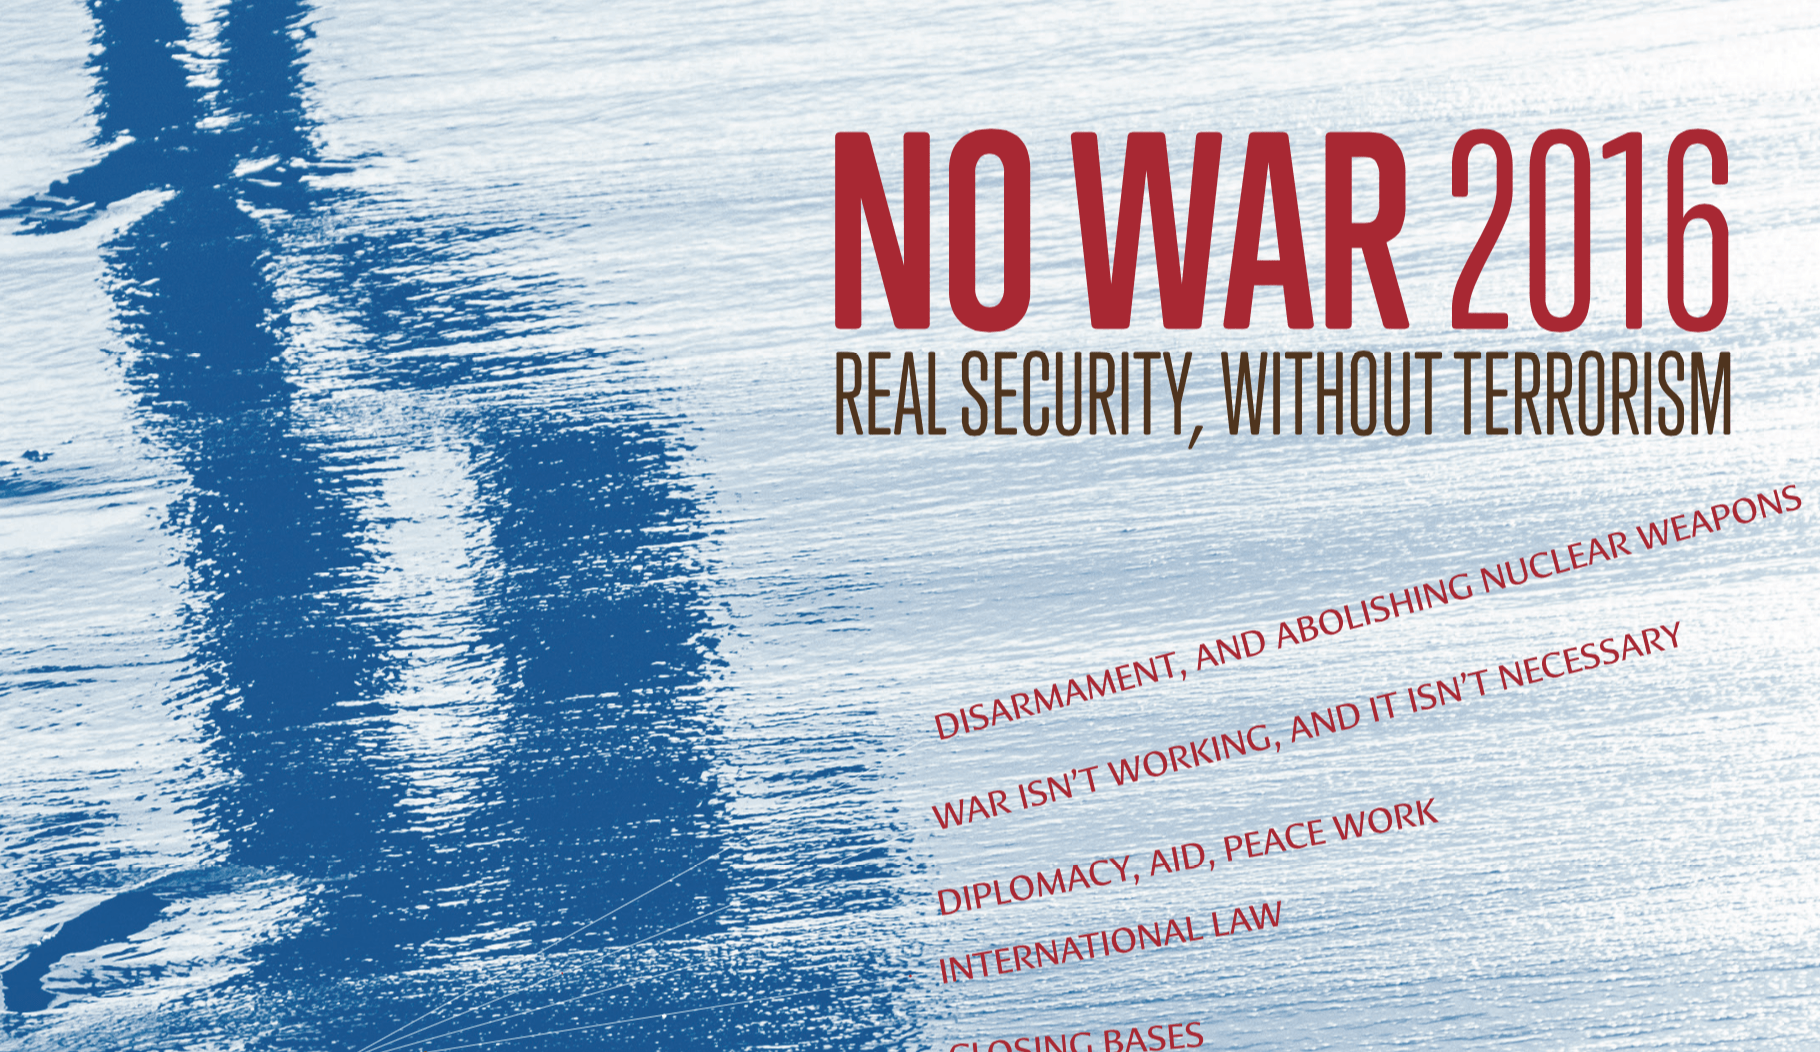 Registration for the “No War 2016: Real Security Without Terrorism” Conference in Washington, D.C., September 23-25 is almost closed, as space is filling up.